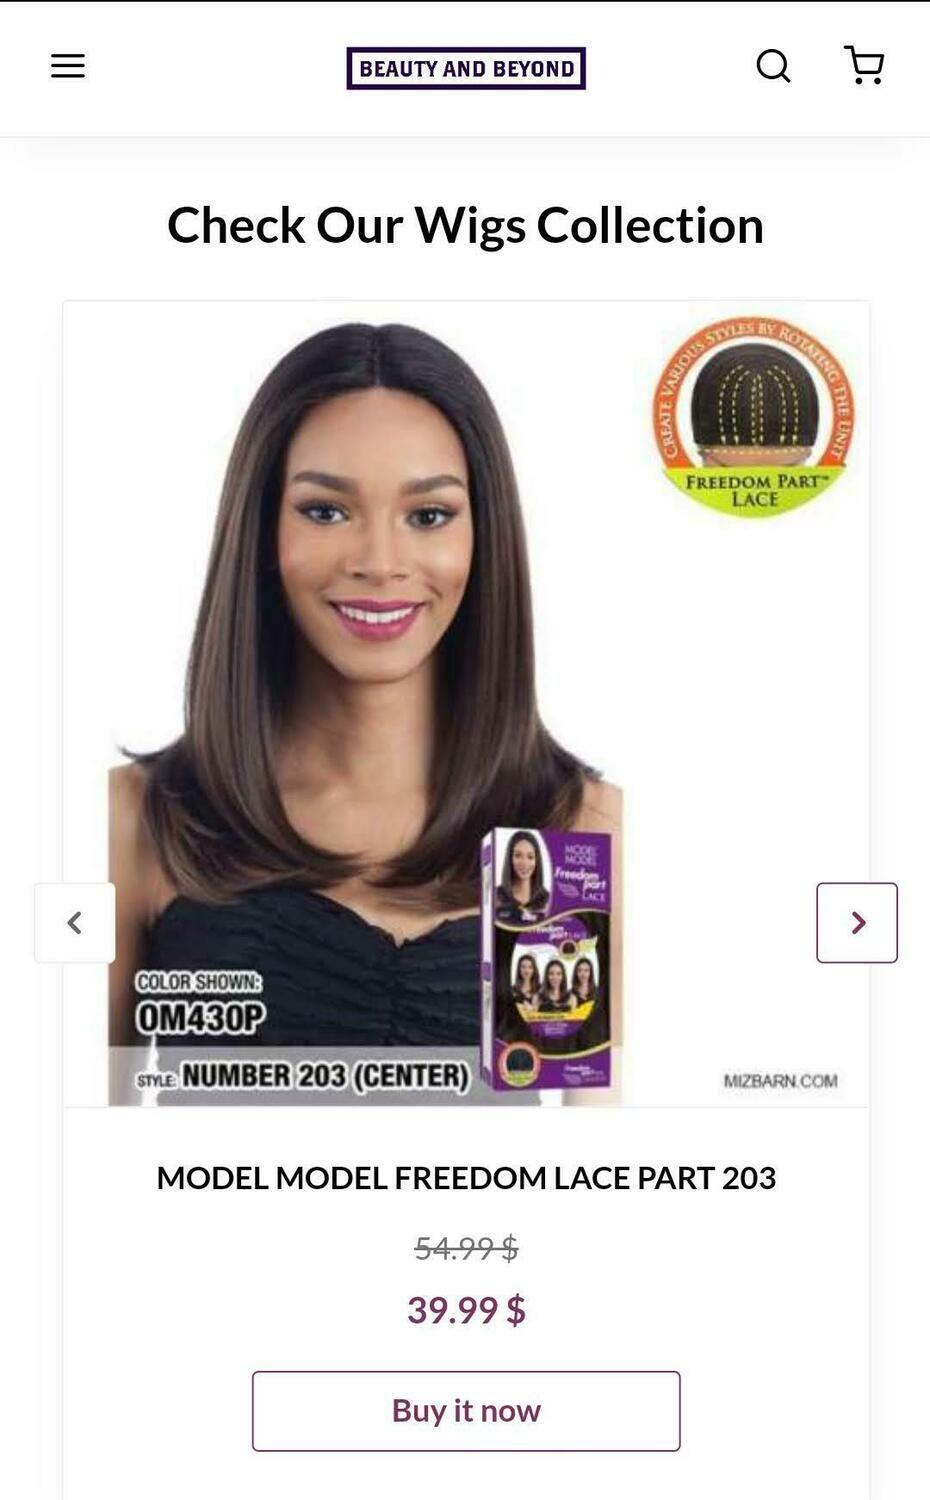 Model Model Freedom Lace Part 203